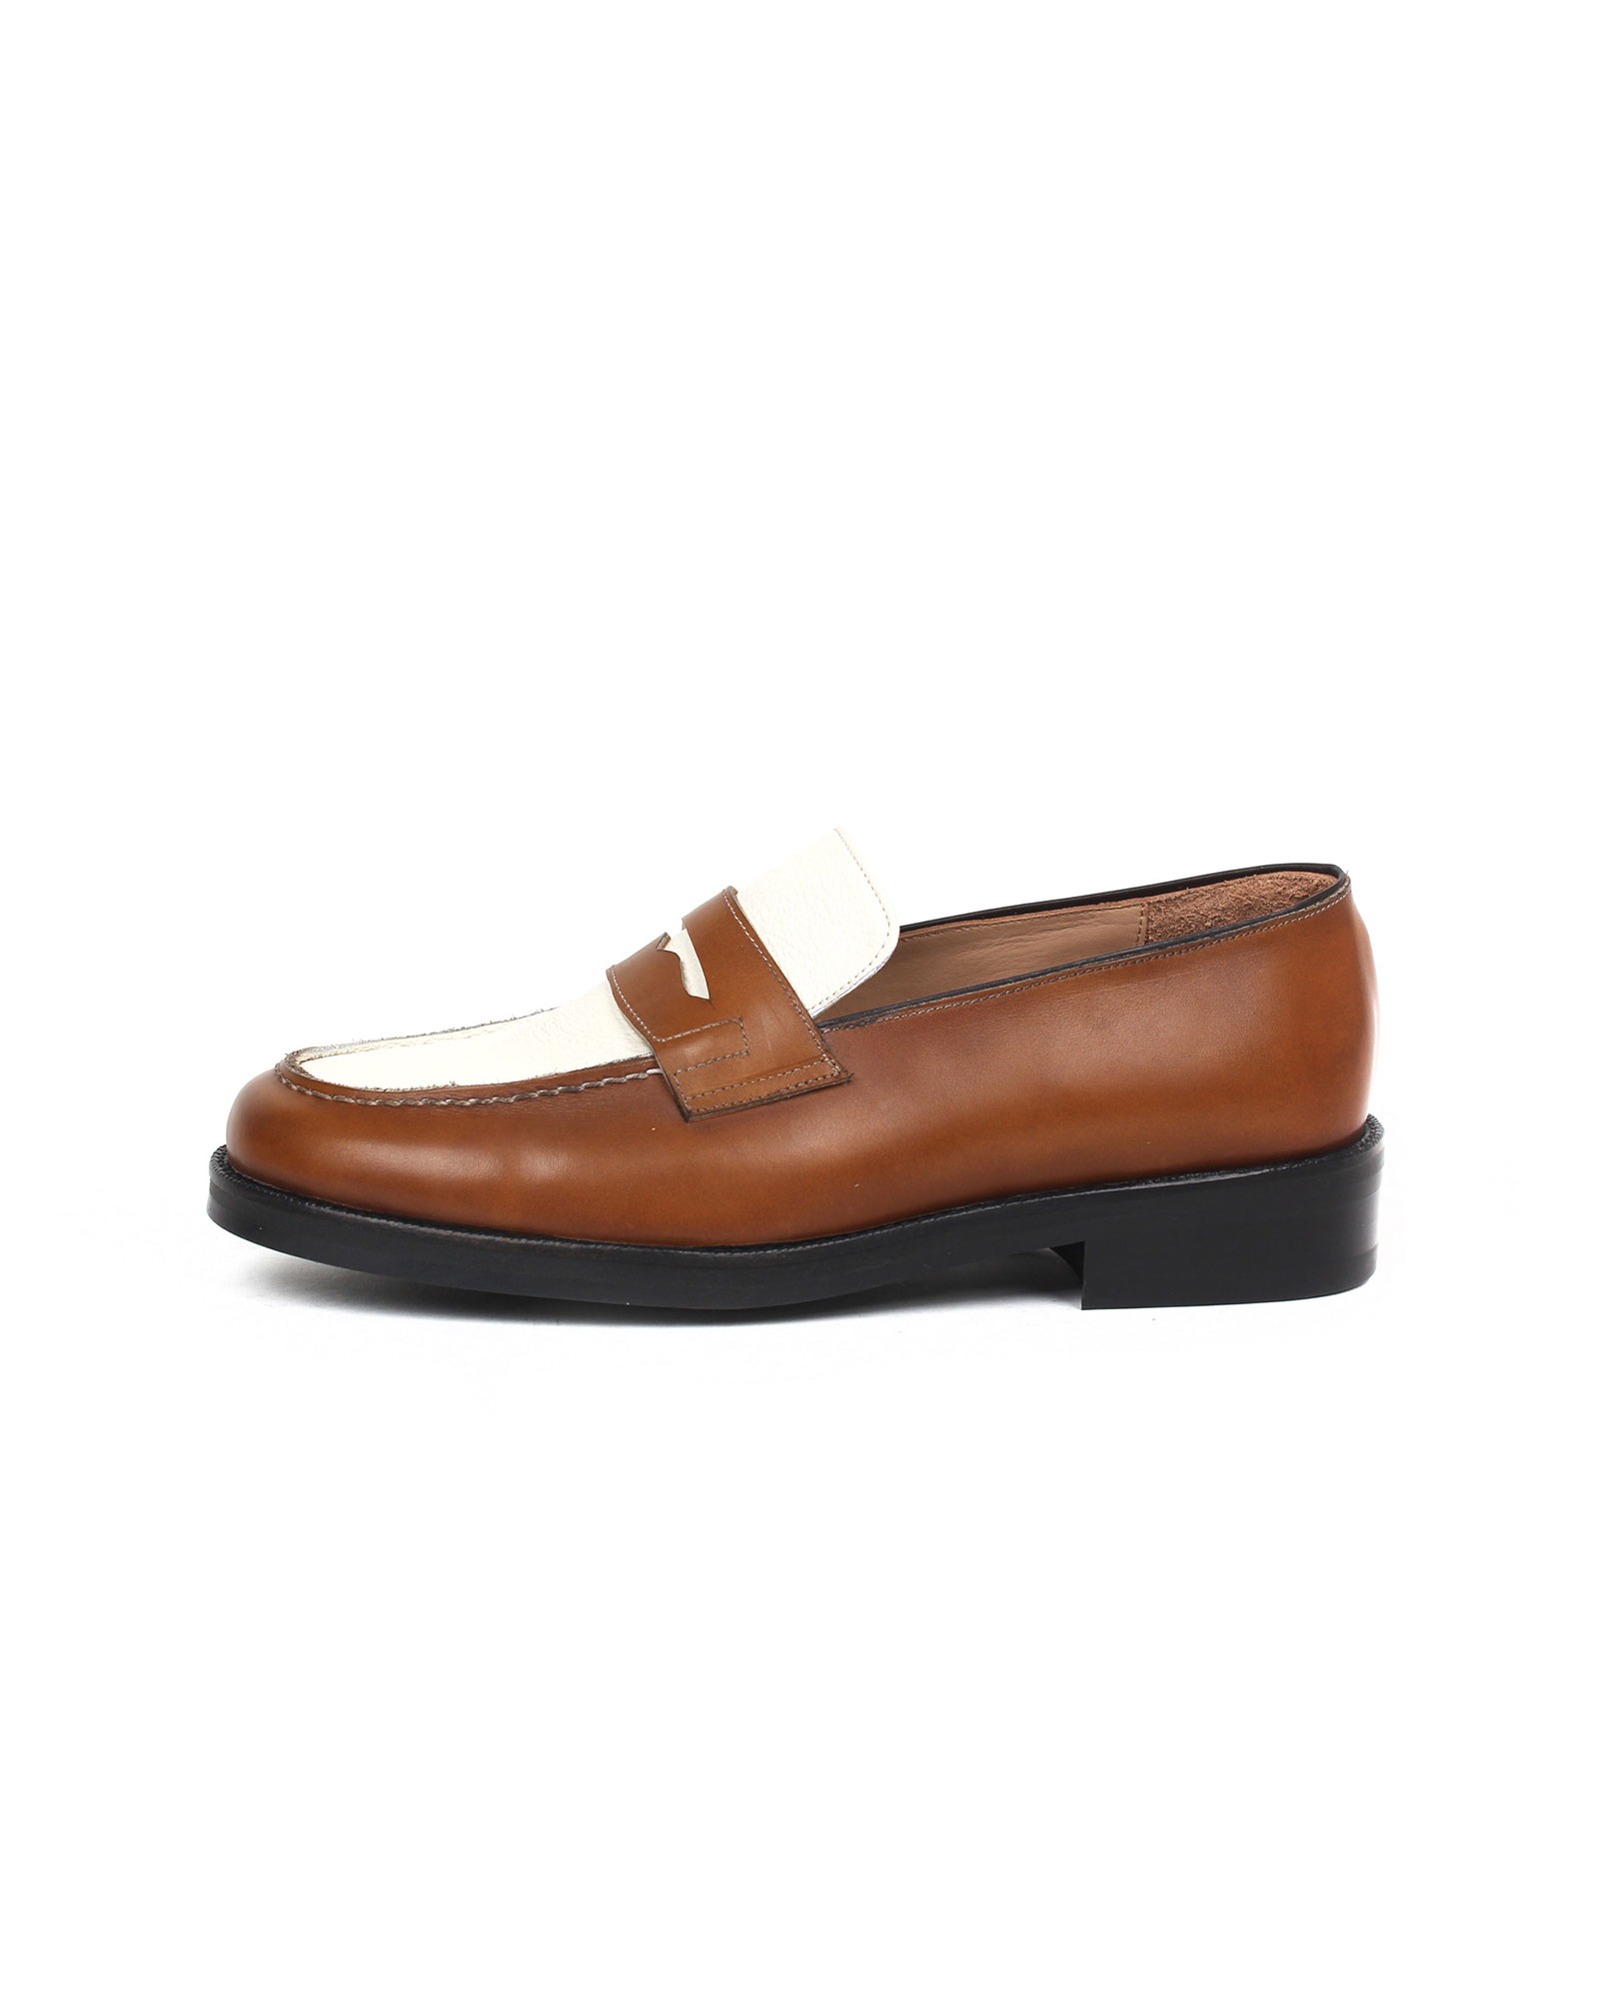 Spectator Loafers (Brown)